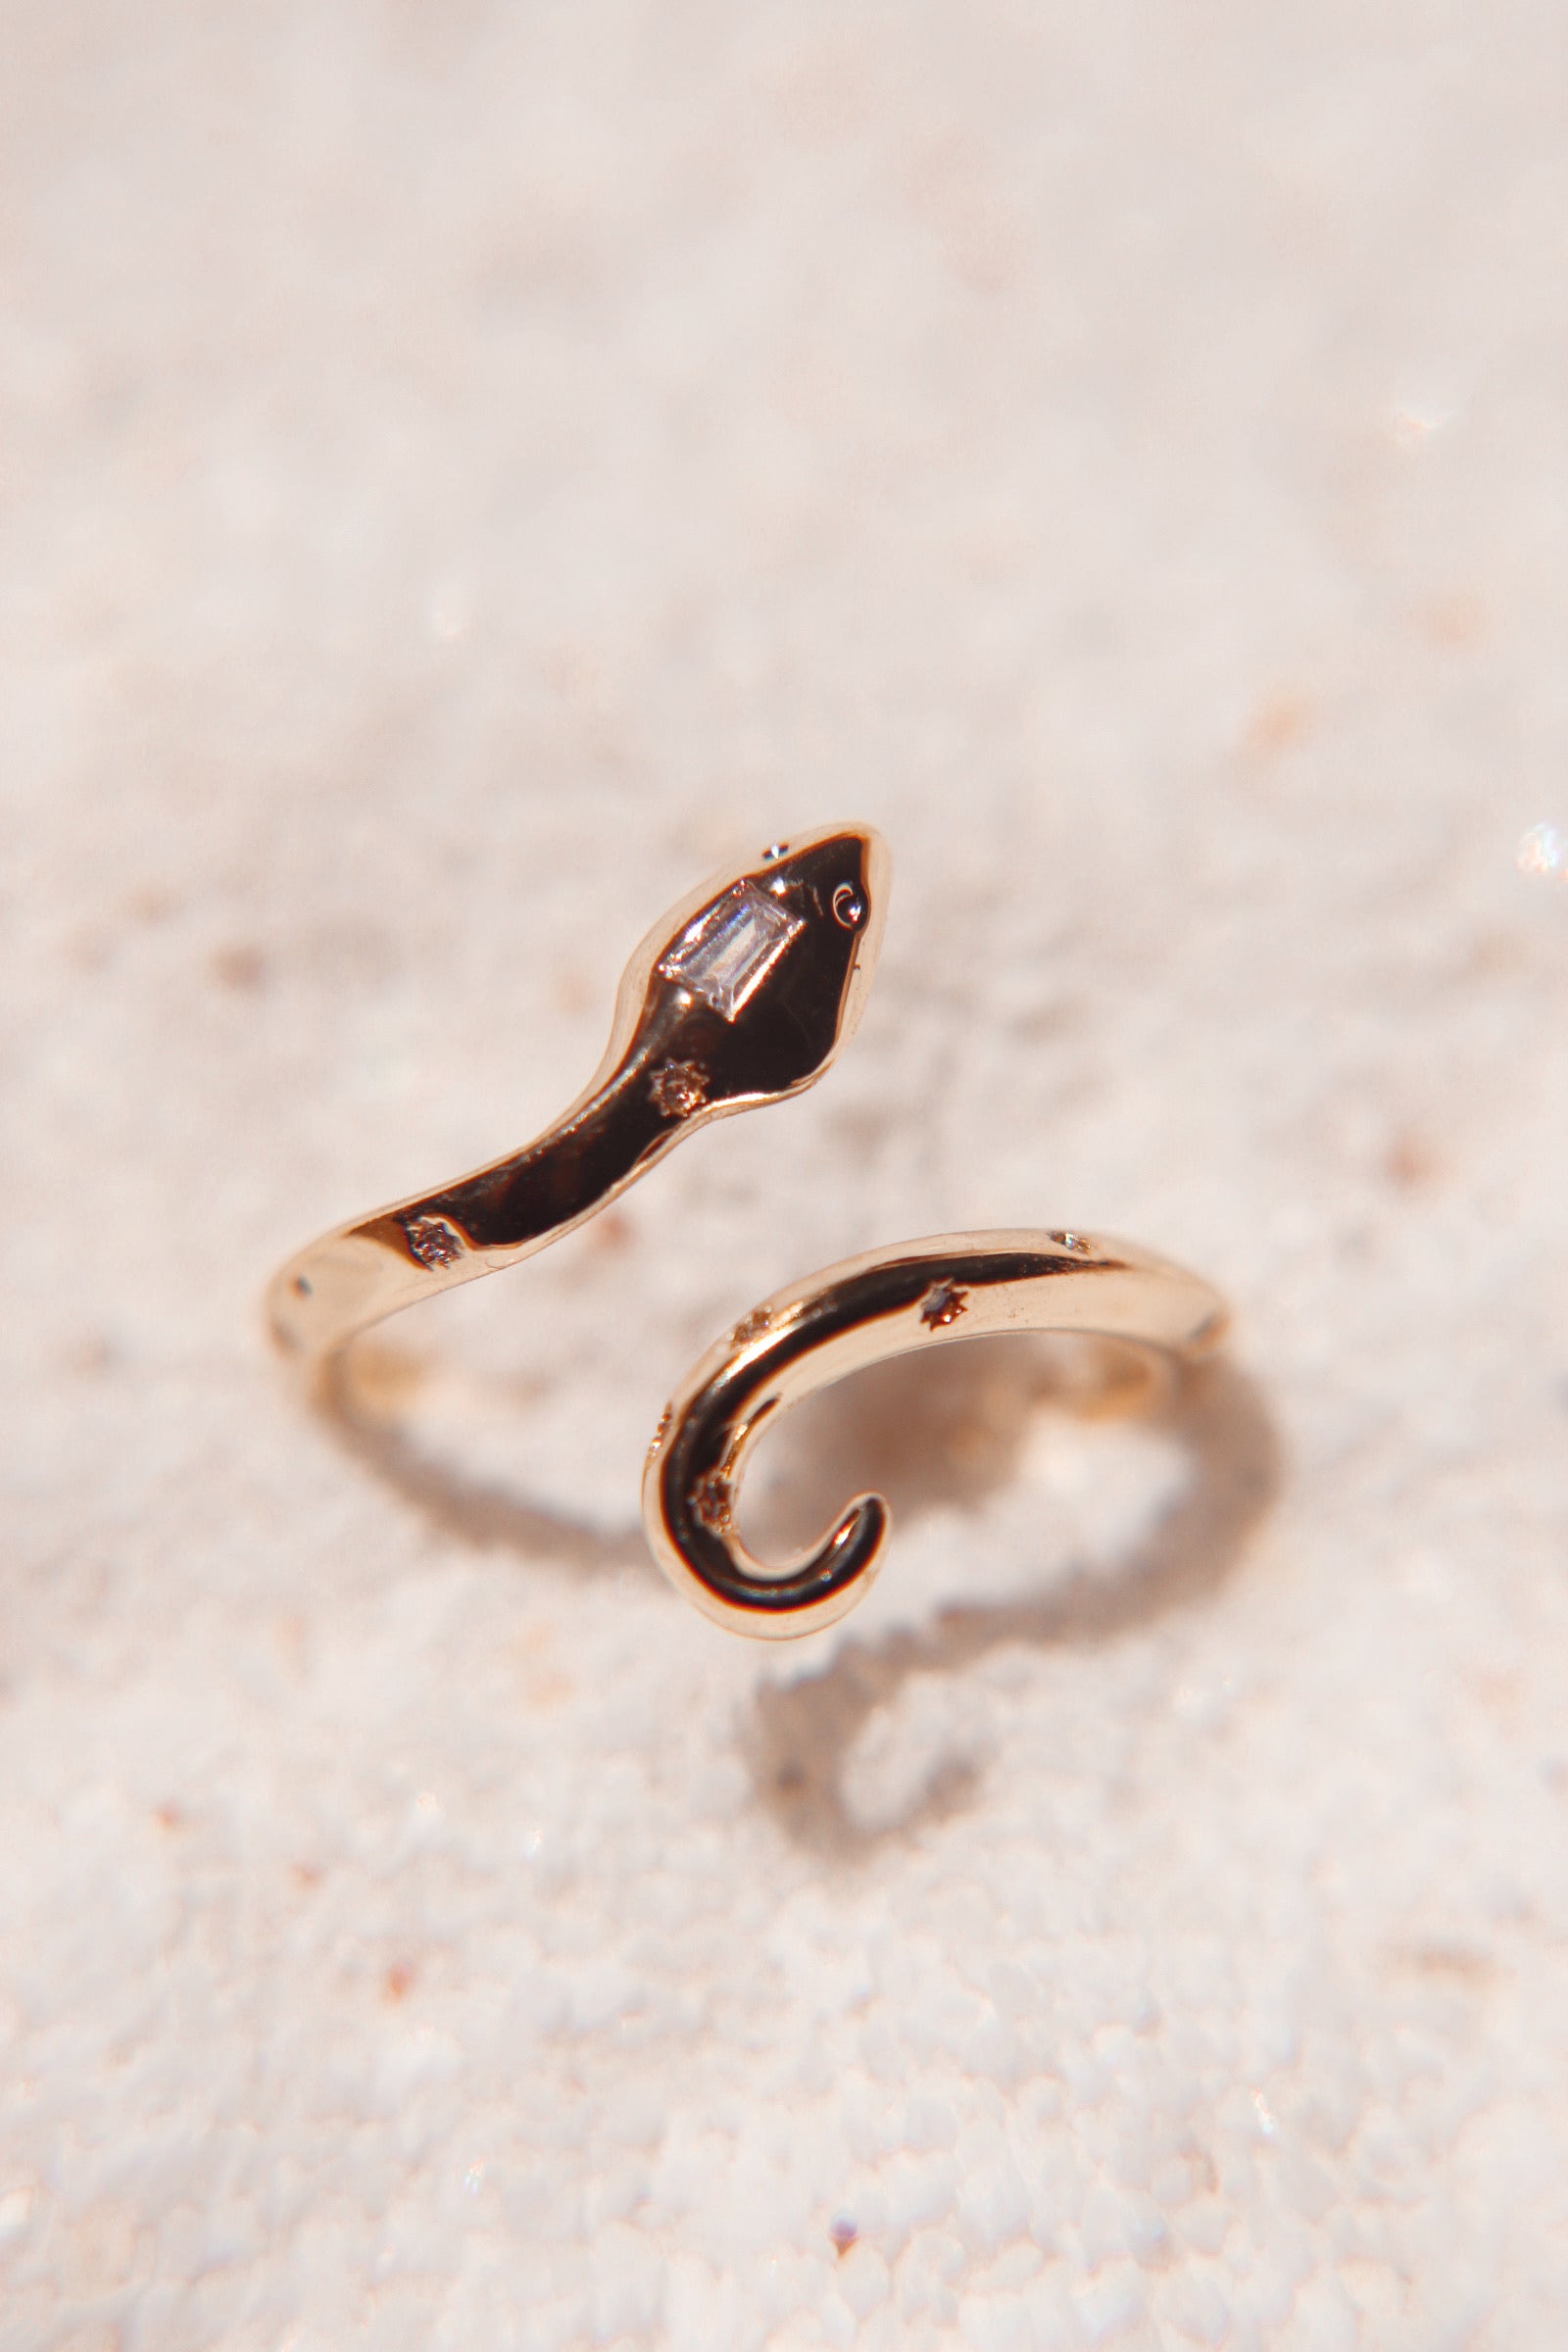 Gold snake ring with embedded gemstones displayed on a textured light-colored surface.